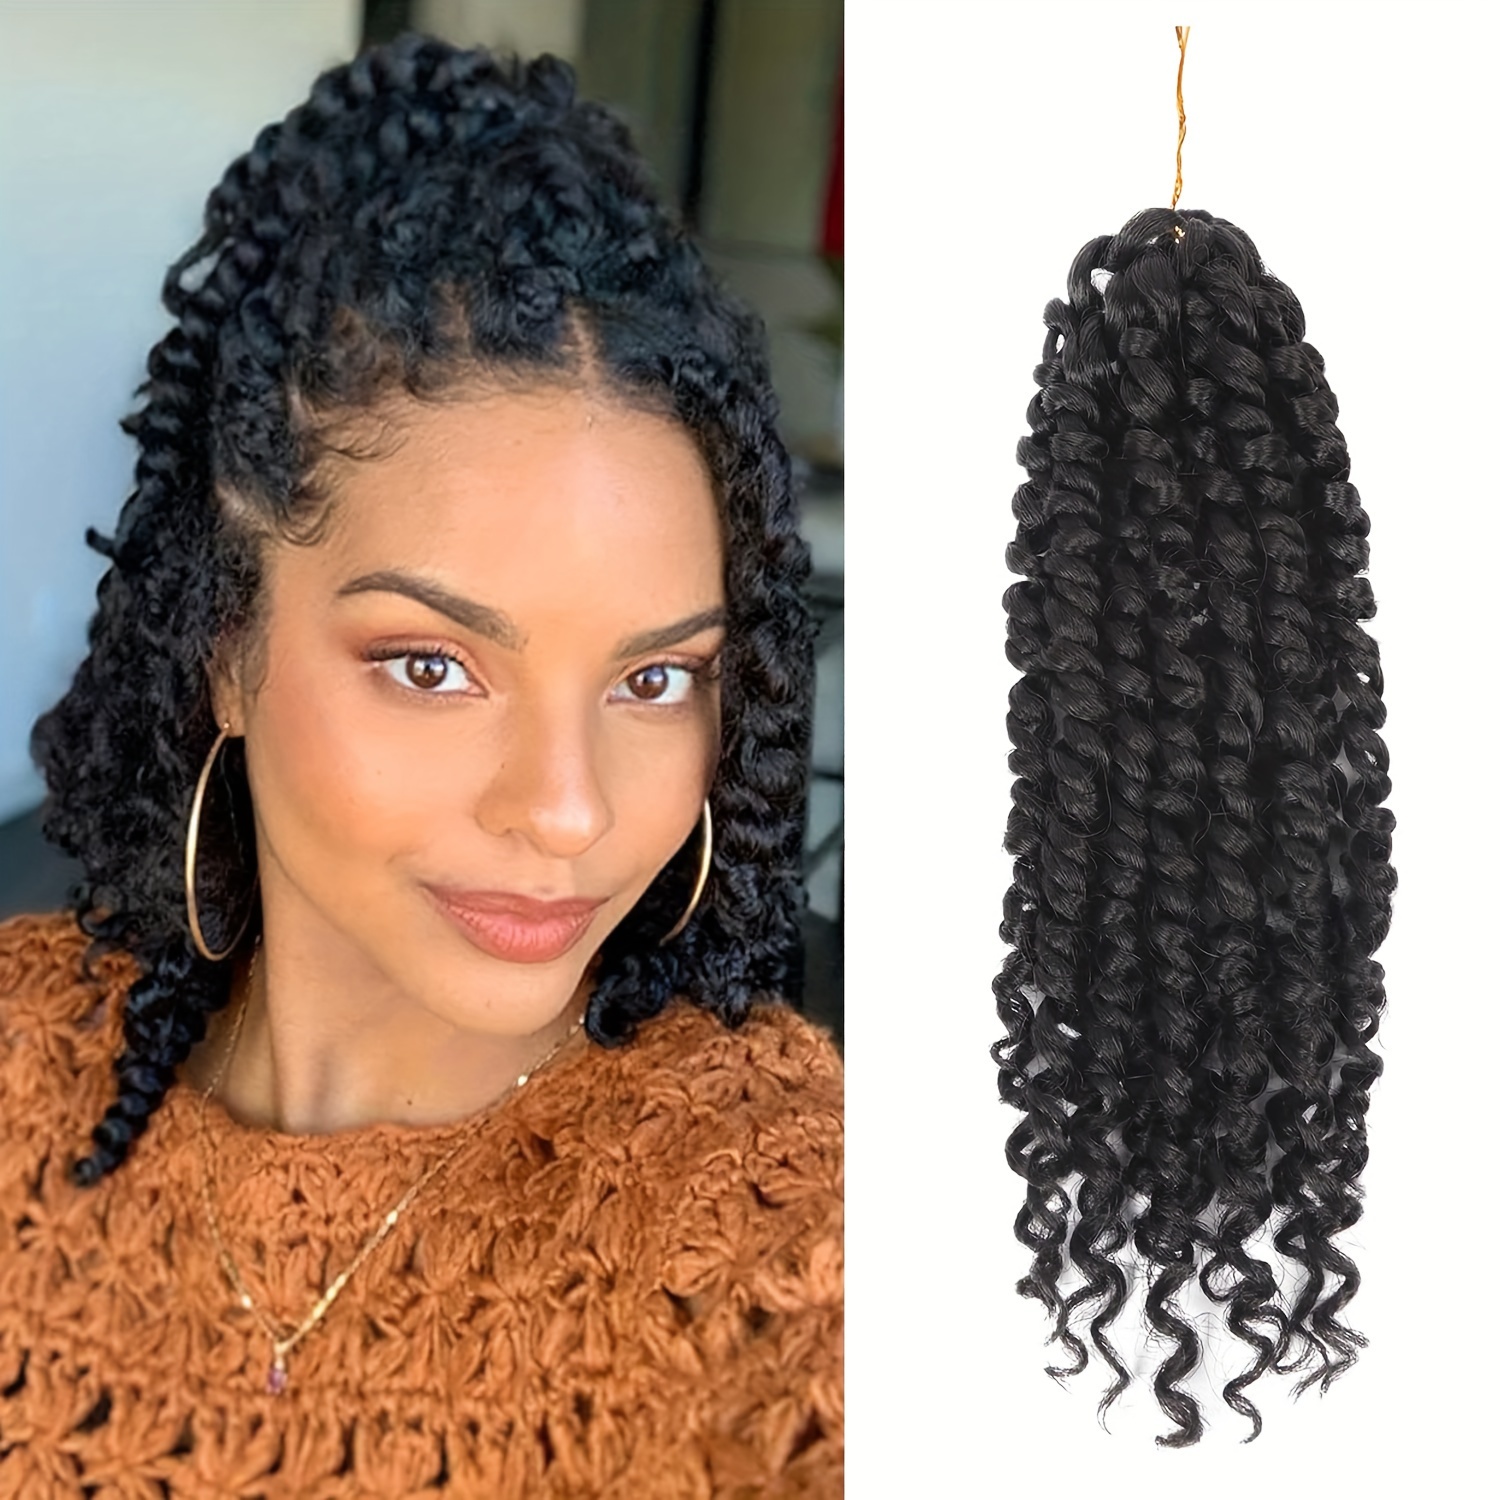 Passion Twist Crochet Hair: What To Wear With Your Short Crocheted Hairstyle